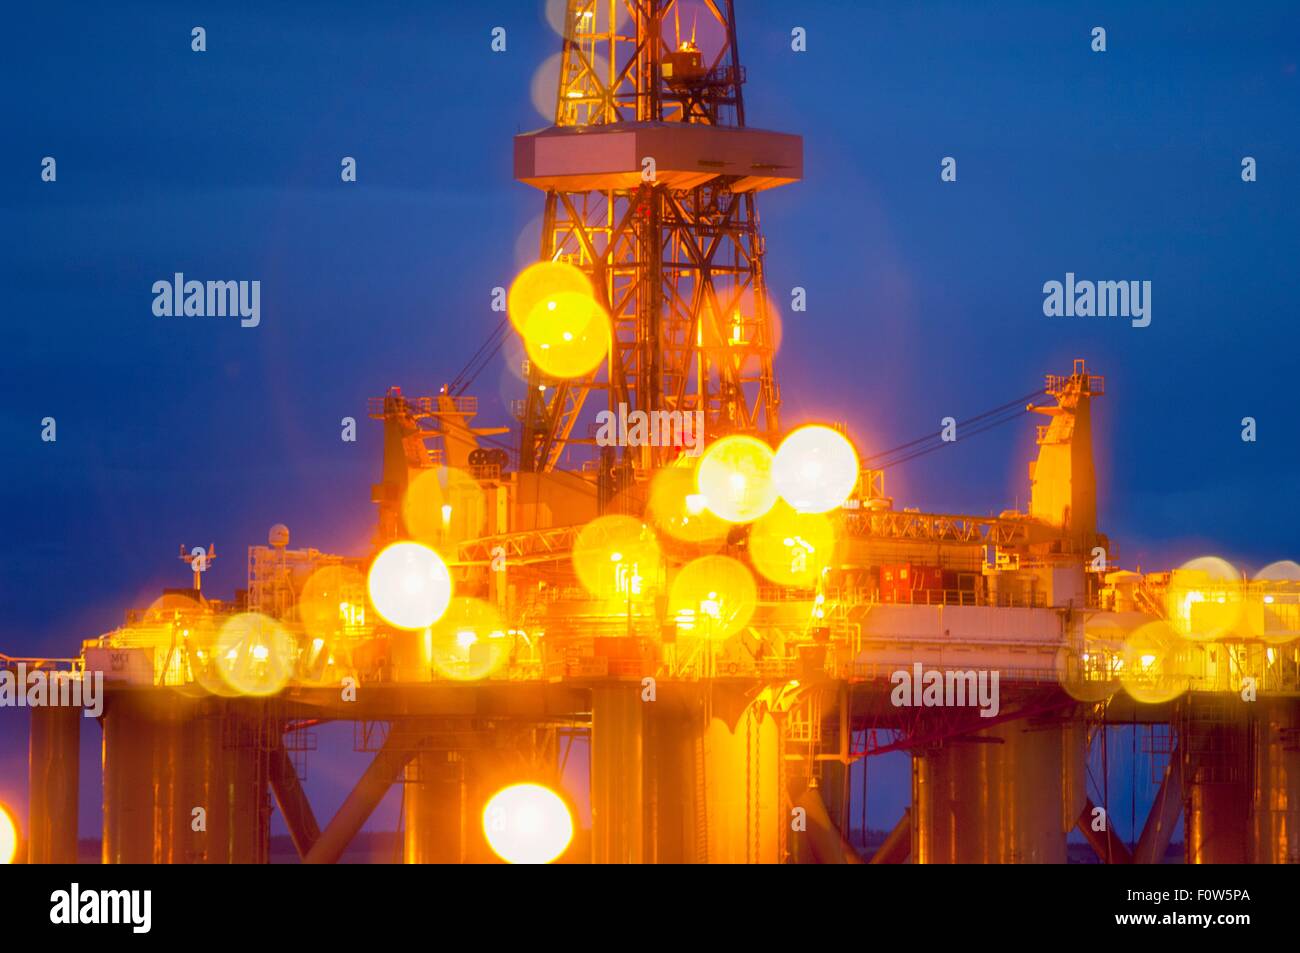 Blurred view of illuminated drilling rig at night Stock Photo